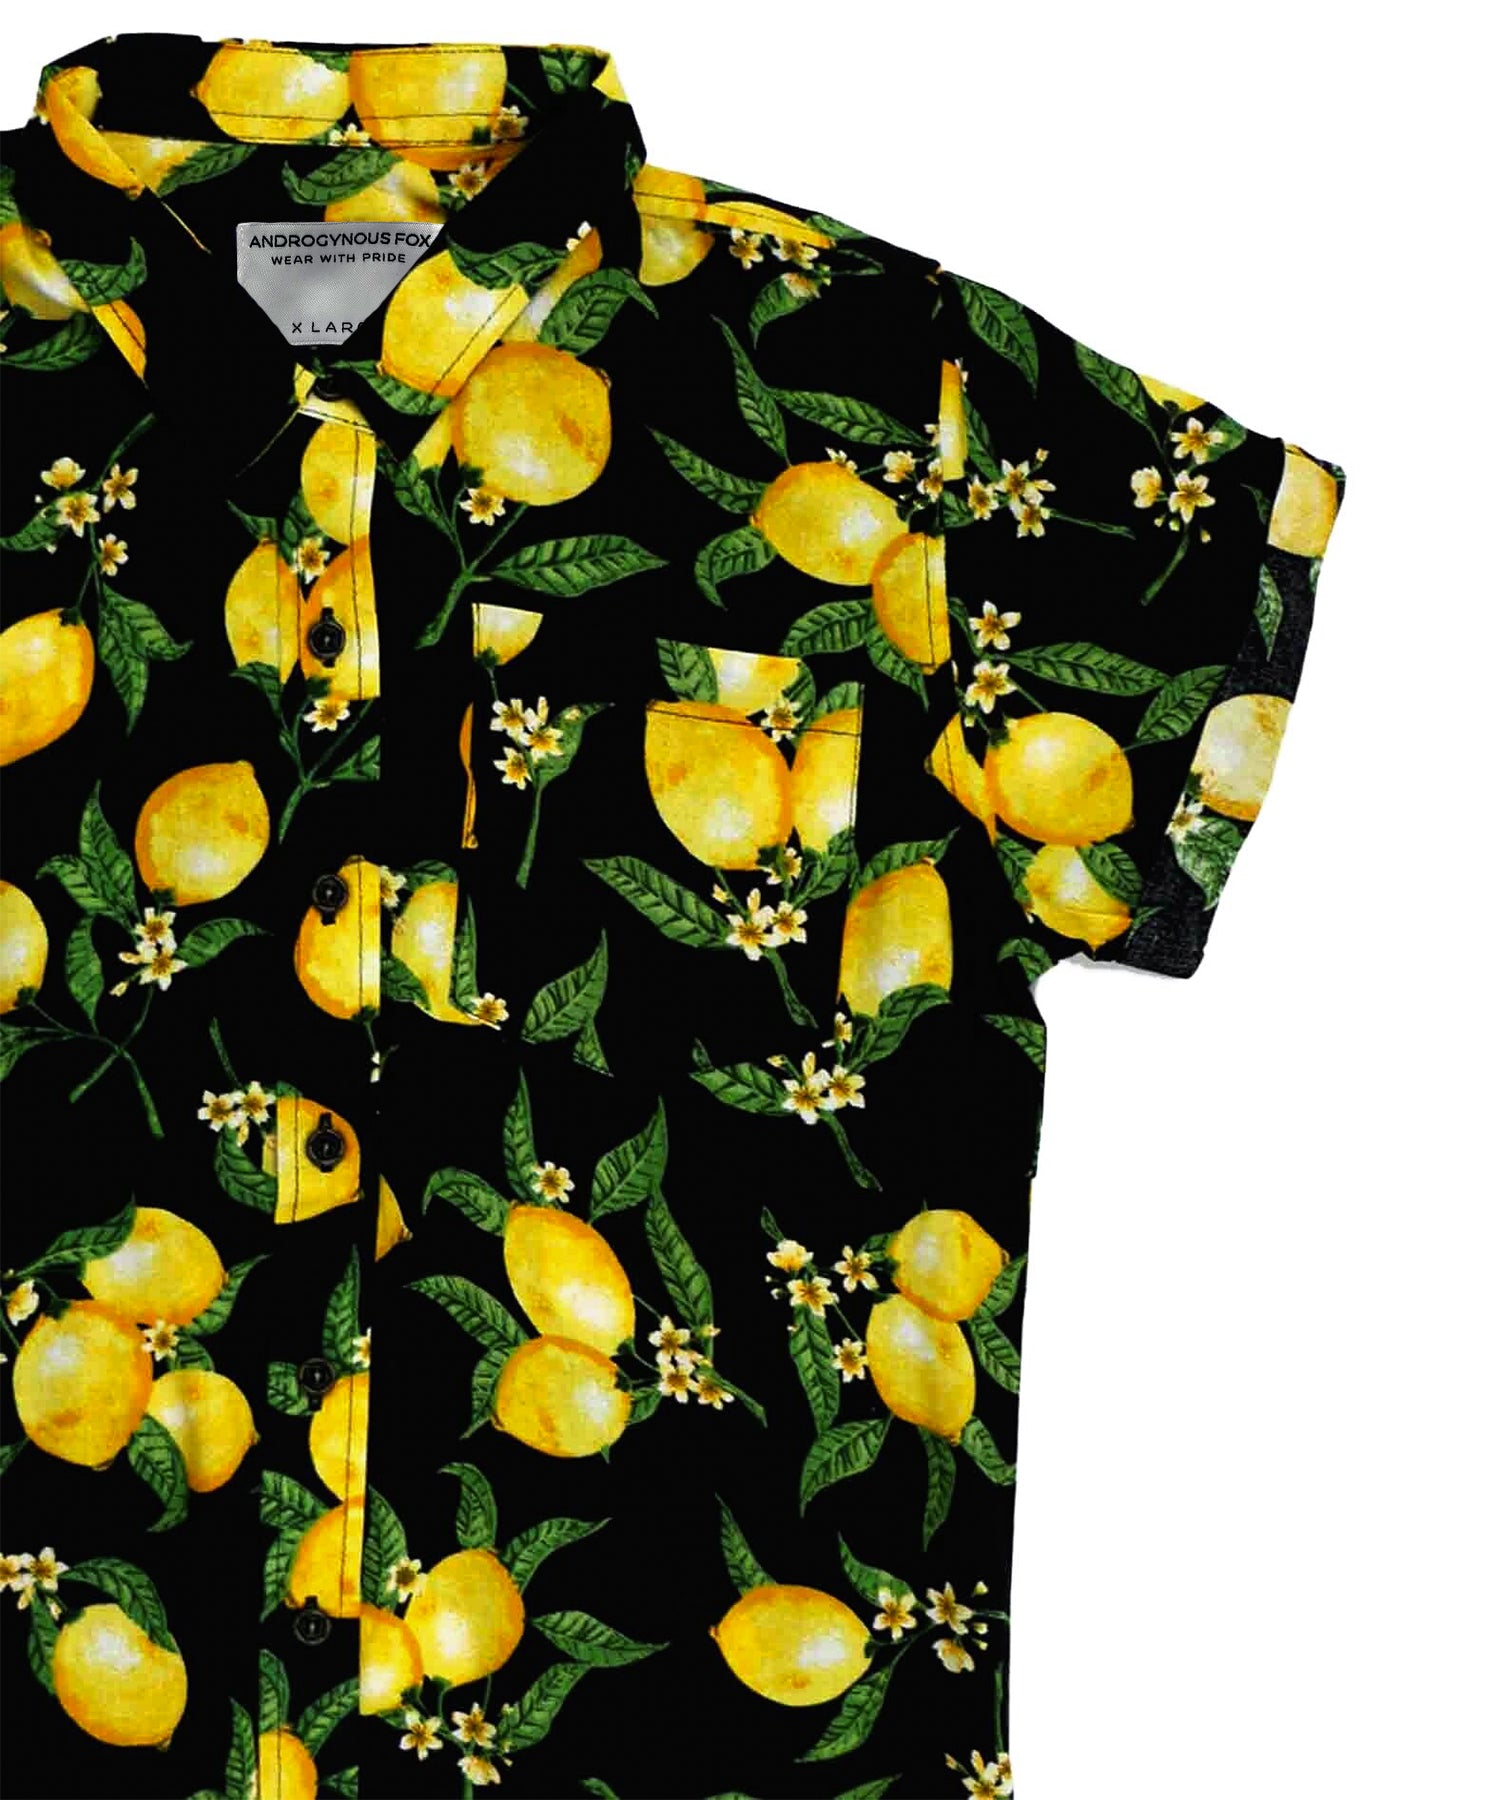 Androgynous Fox 'zinger' button-up with lemon print. 